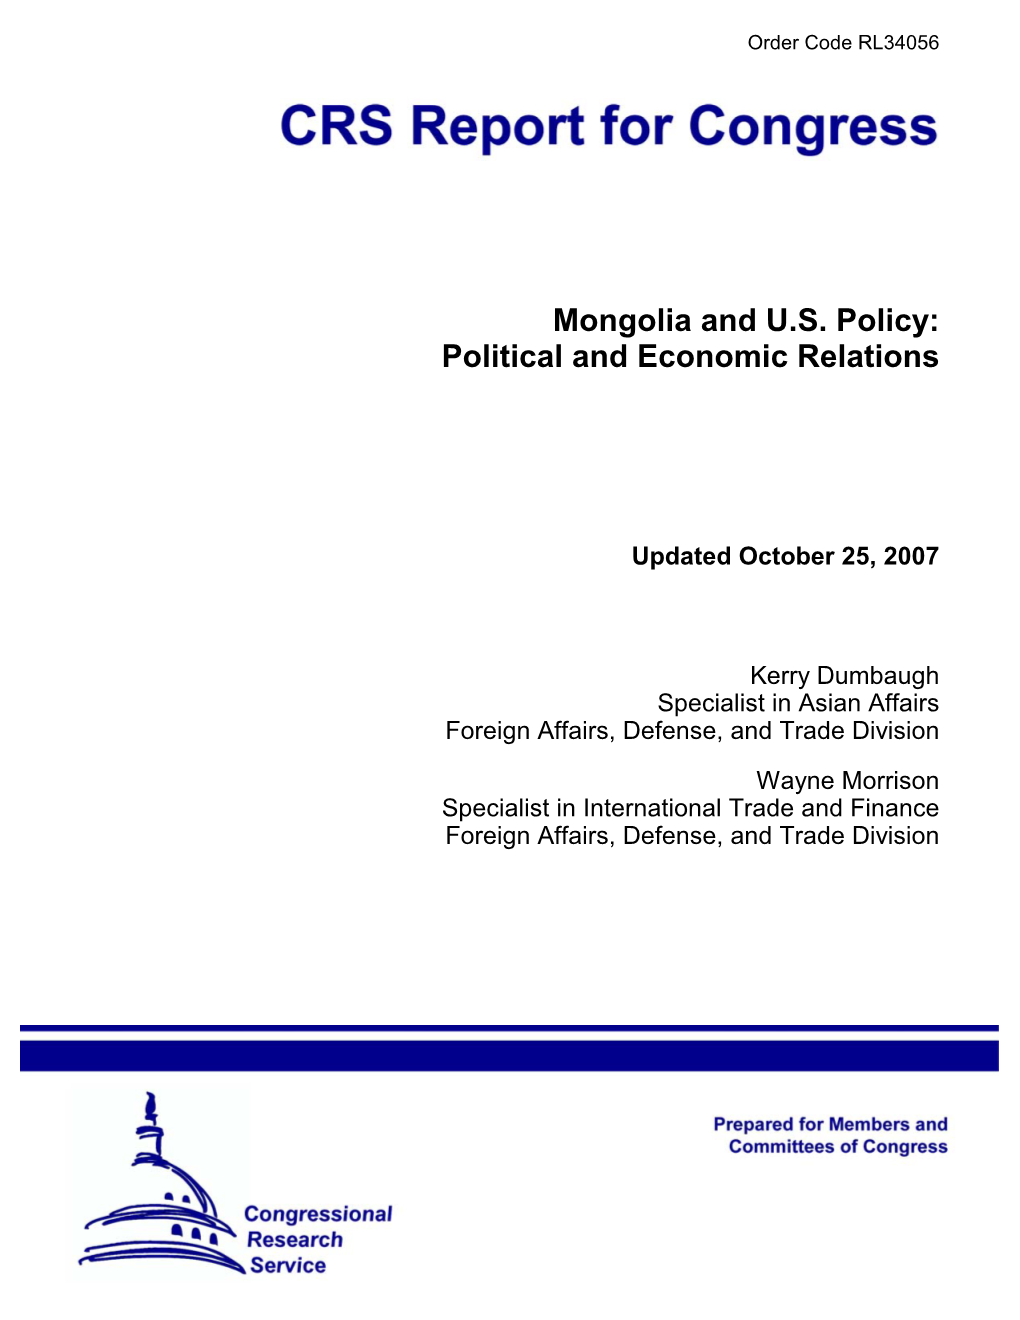 Mongolia and U.S. Policy: Political and Economic Relations